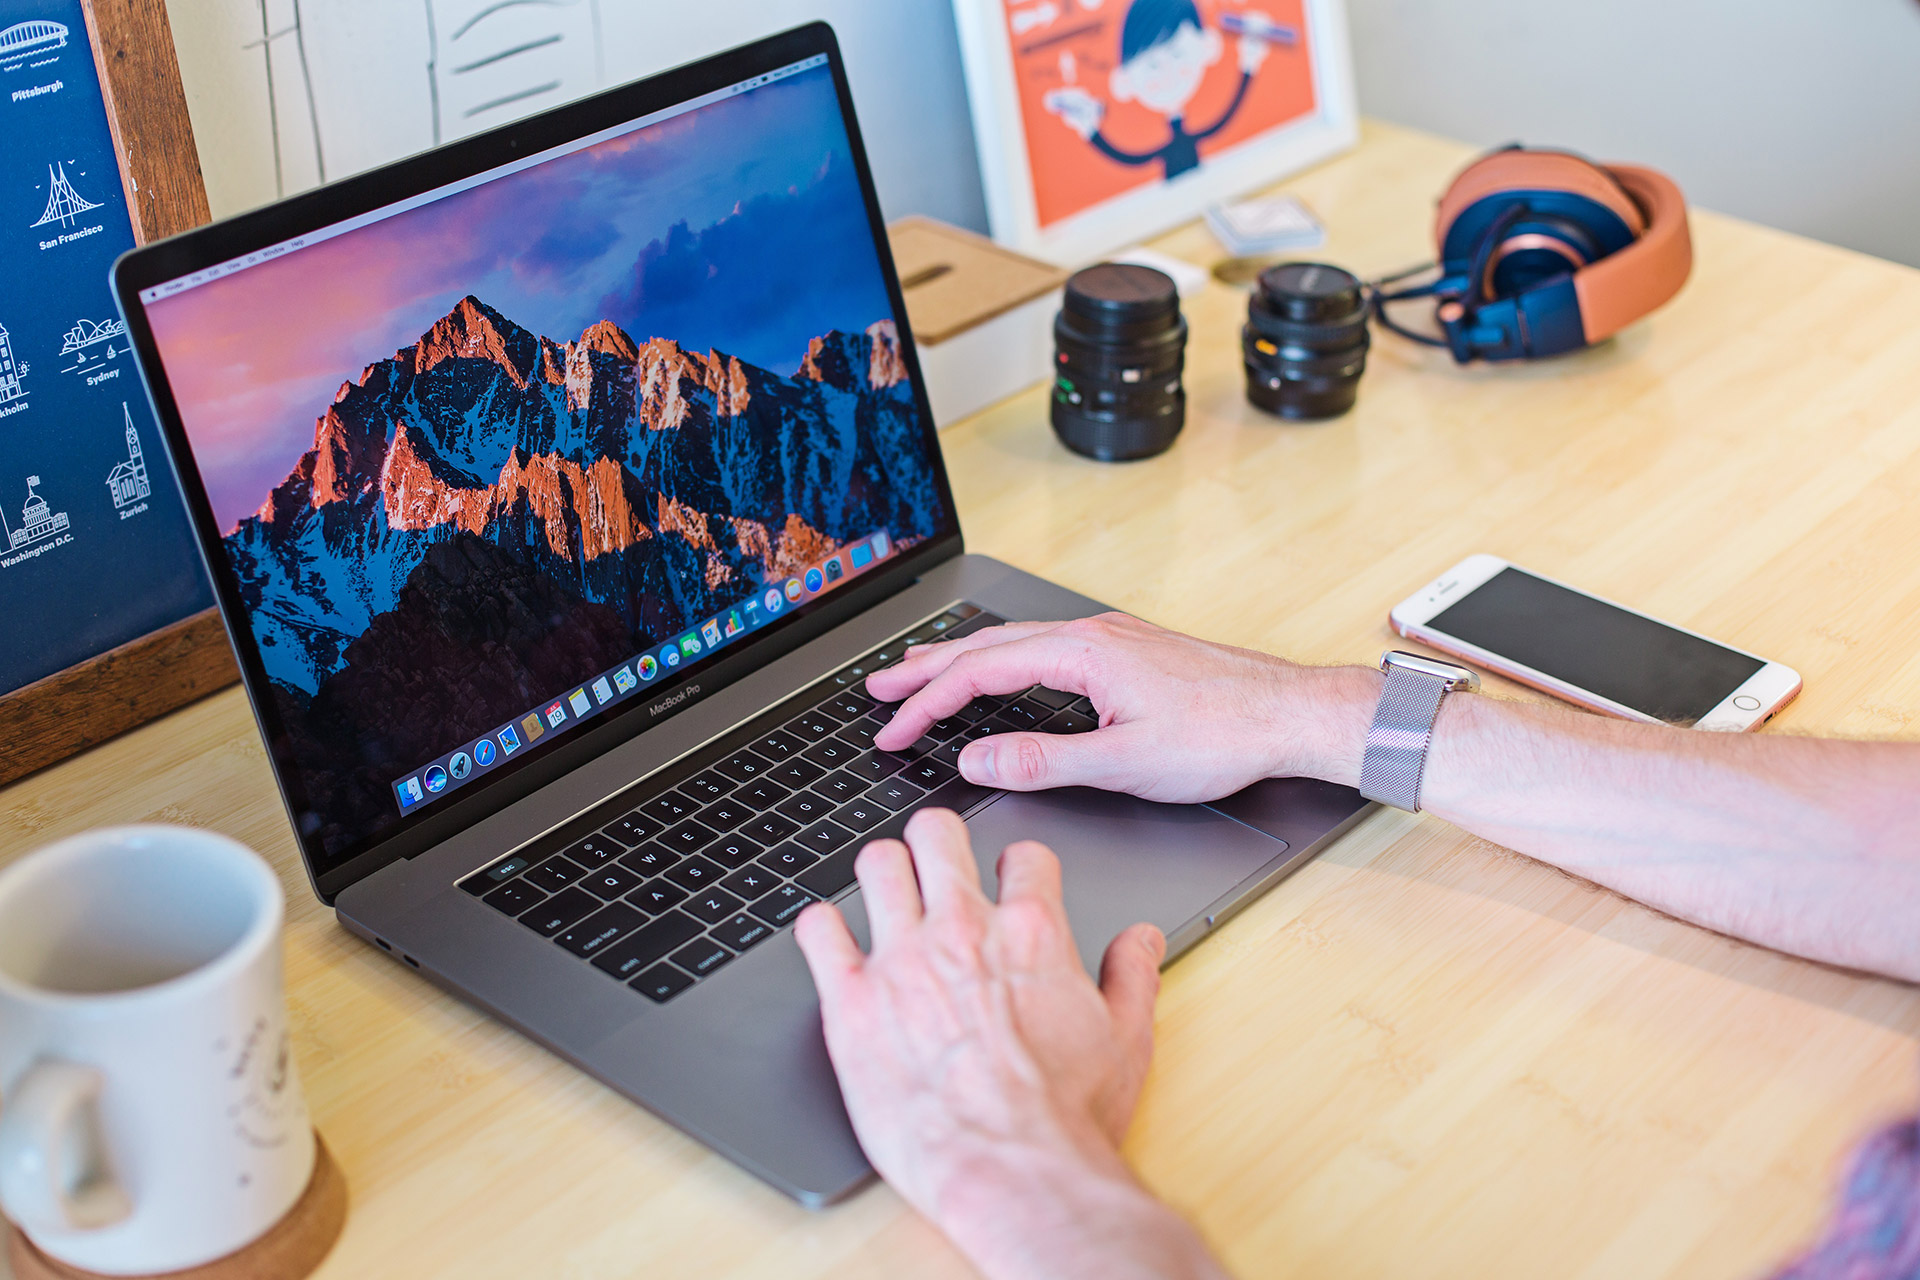 The 2018 MacBook Pro with i9 processor is the fastest laptop Apple has ever made